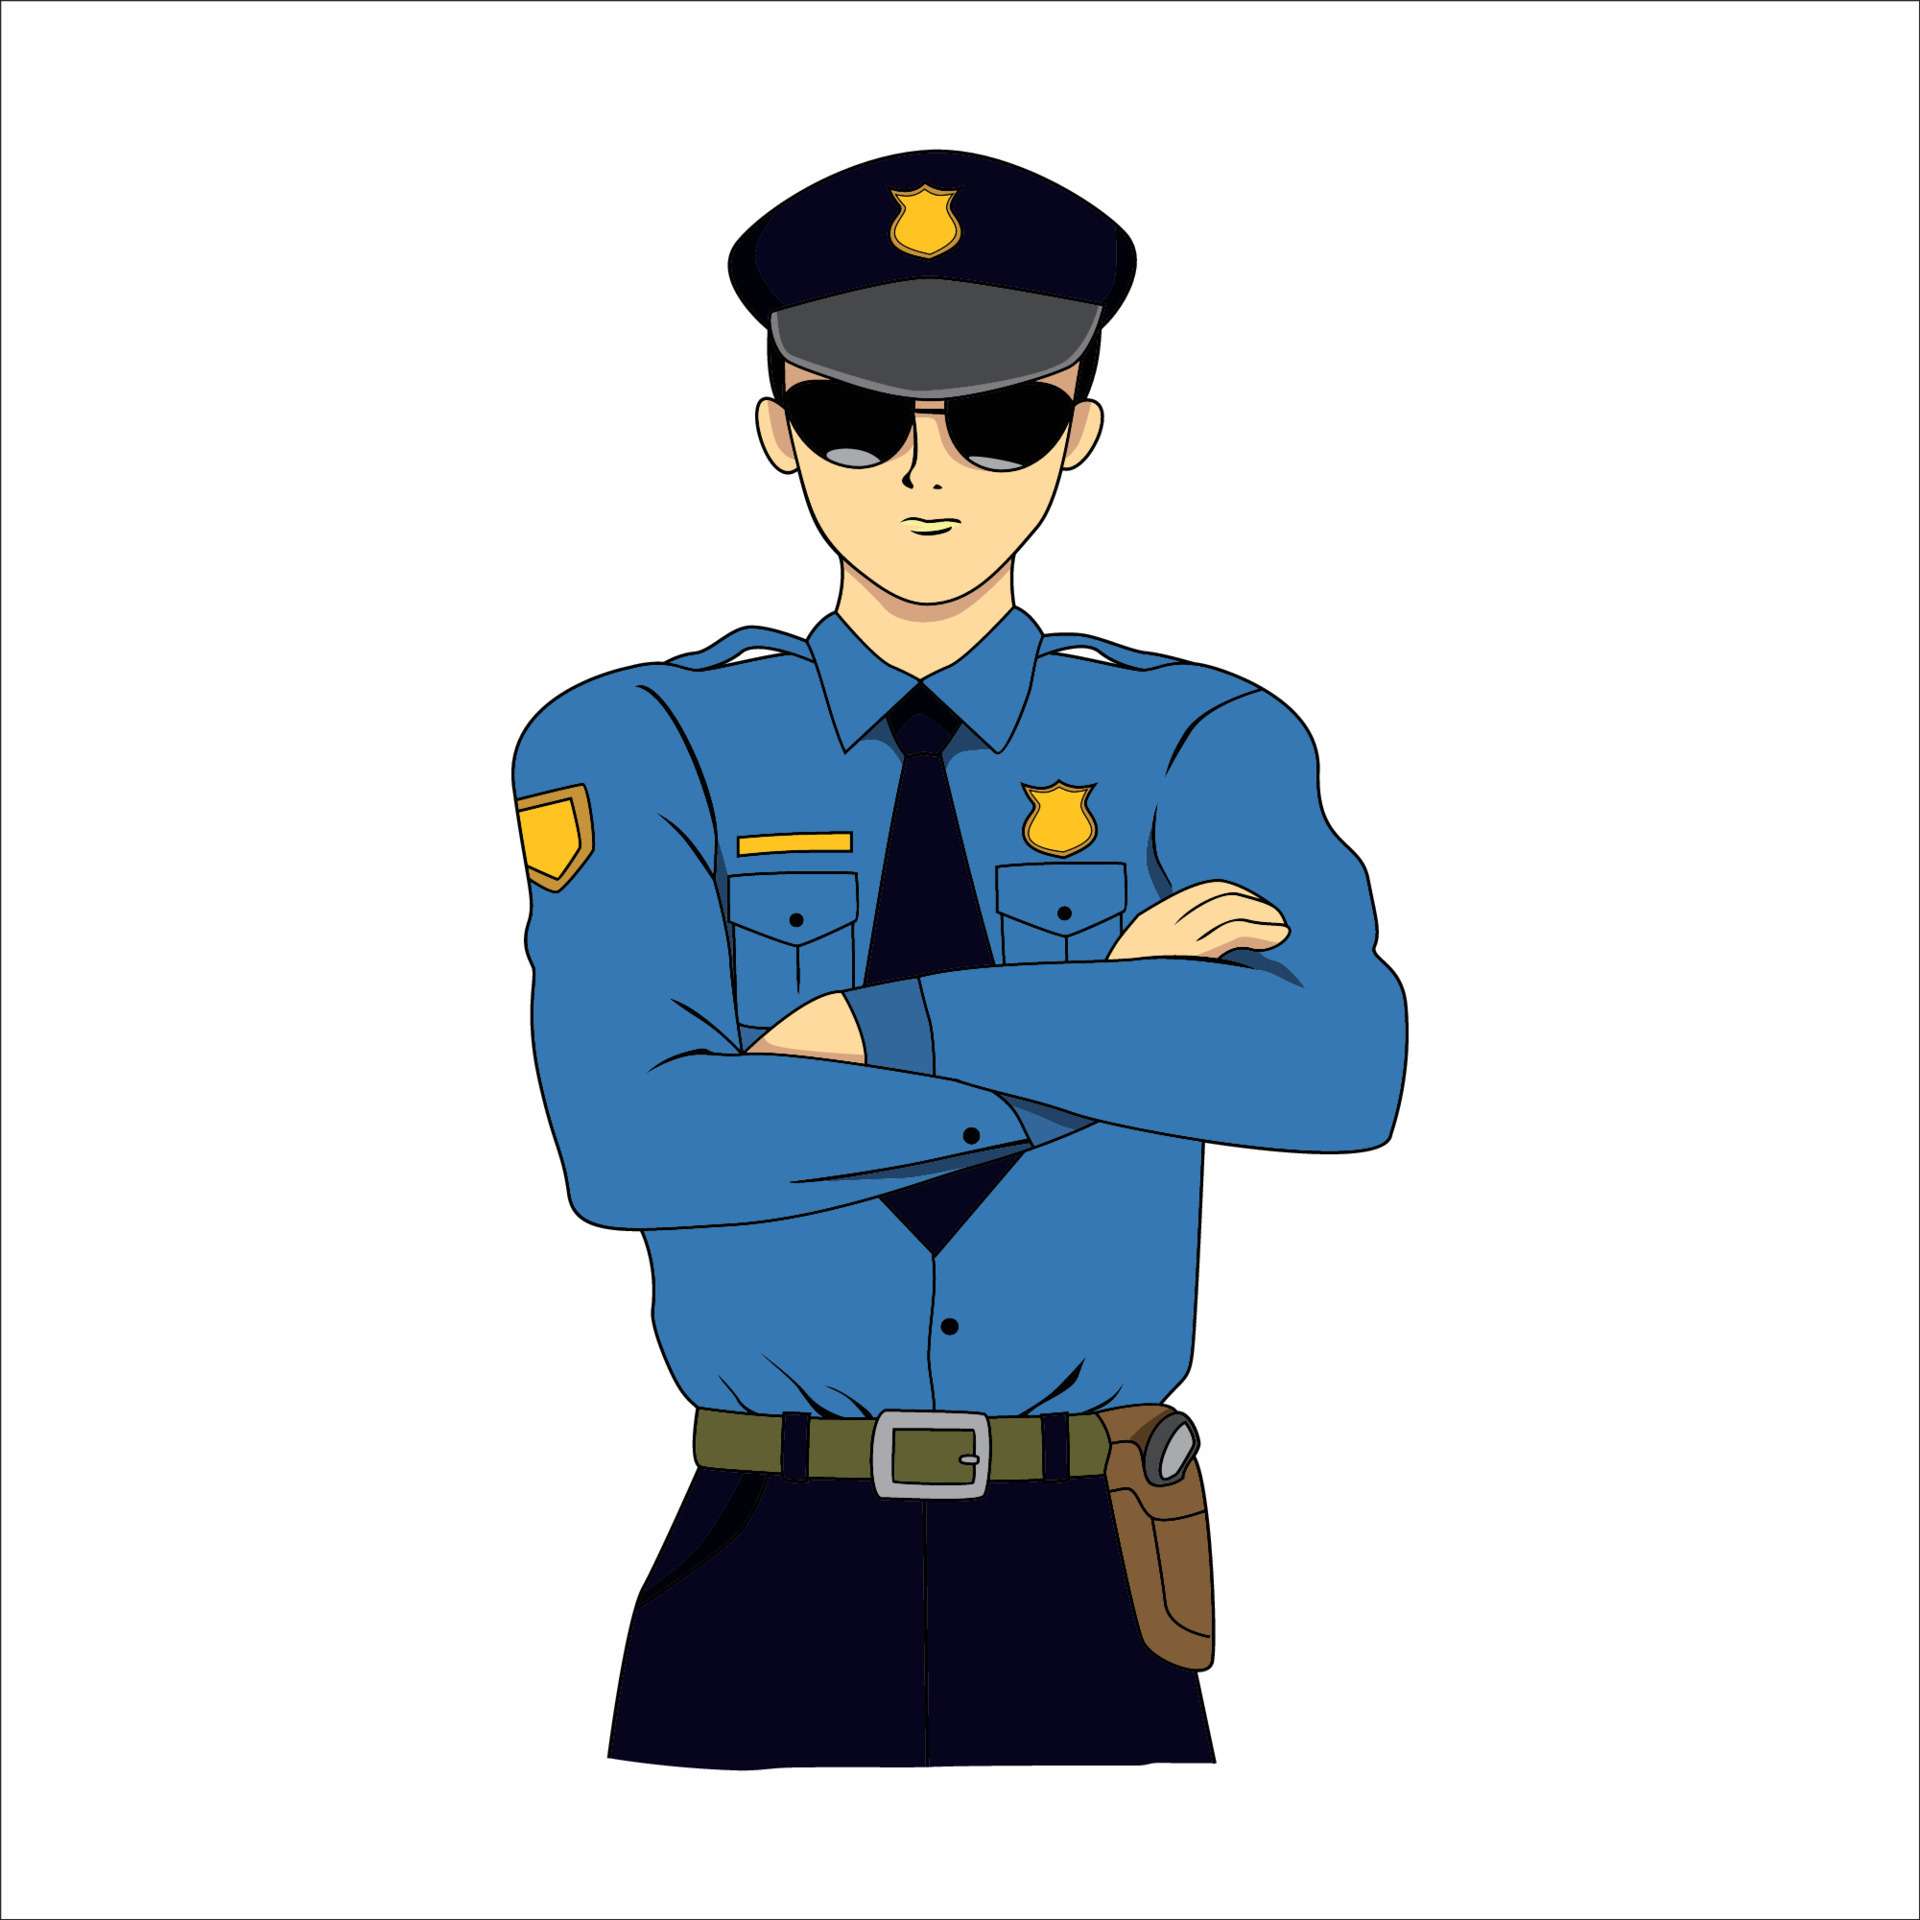 policeman-character-design-law-officer-illustration-justice-sign-and-symbol-vector.jpg